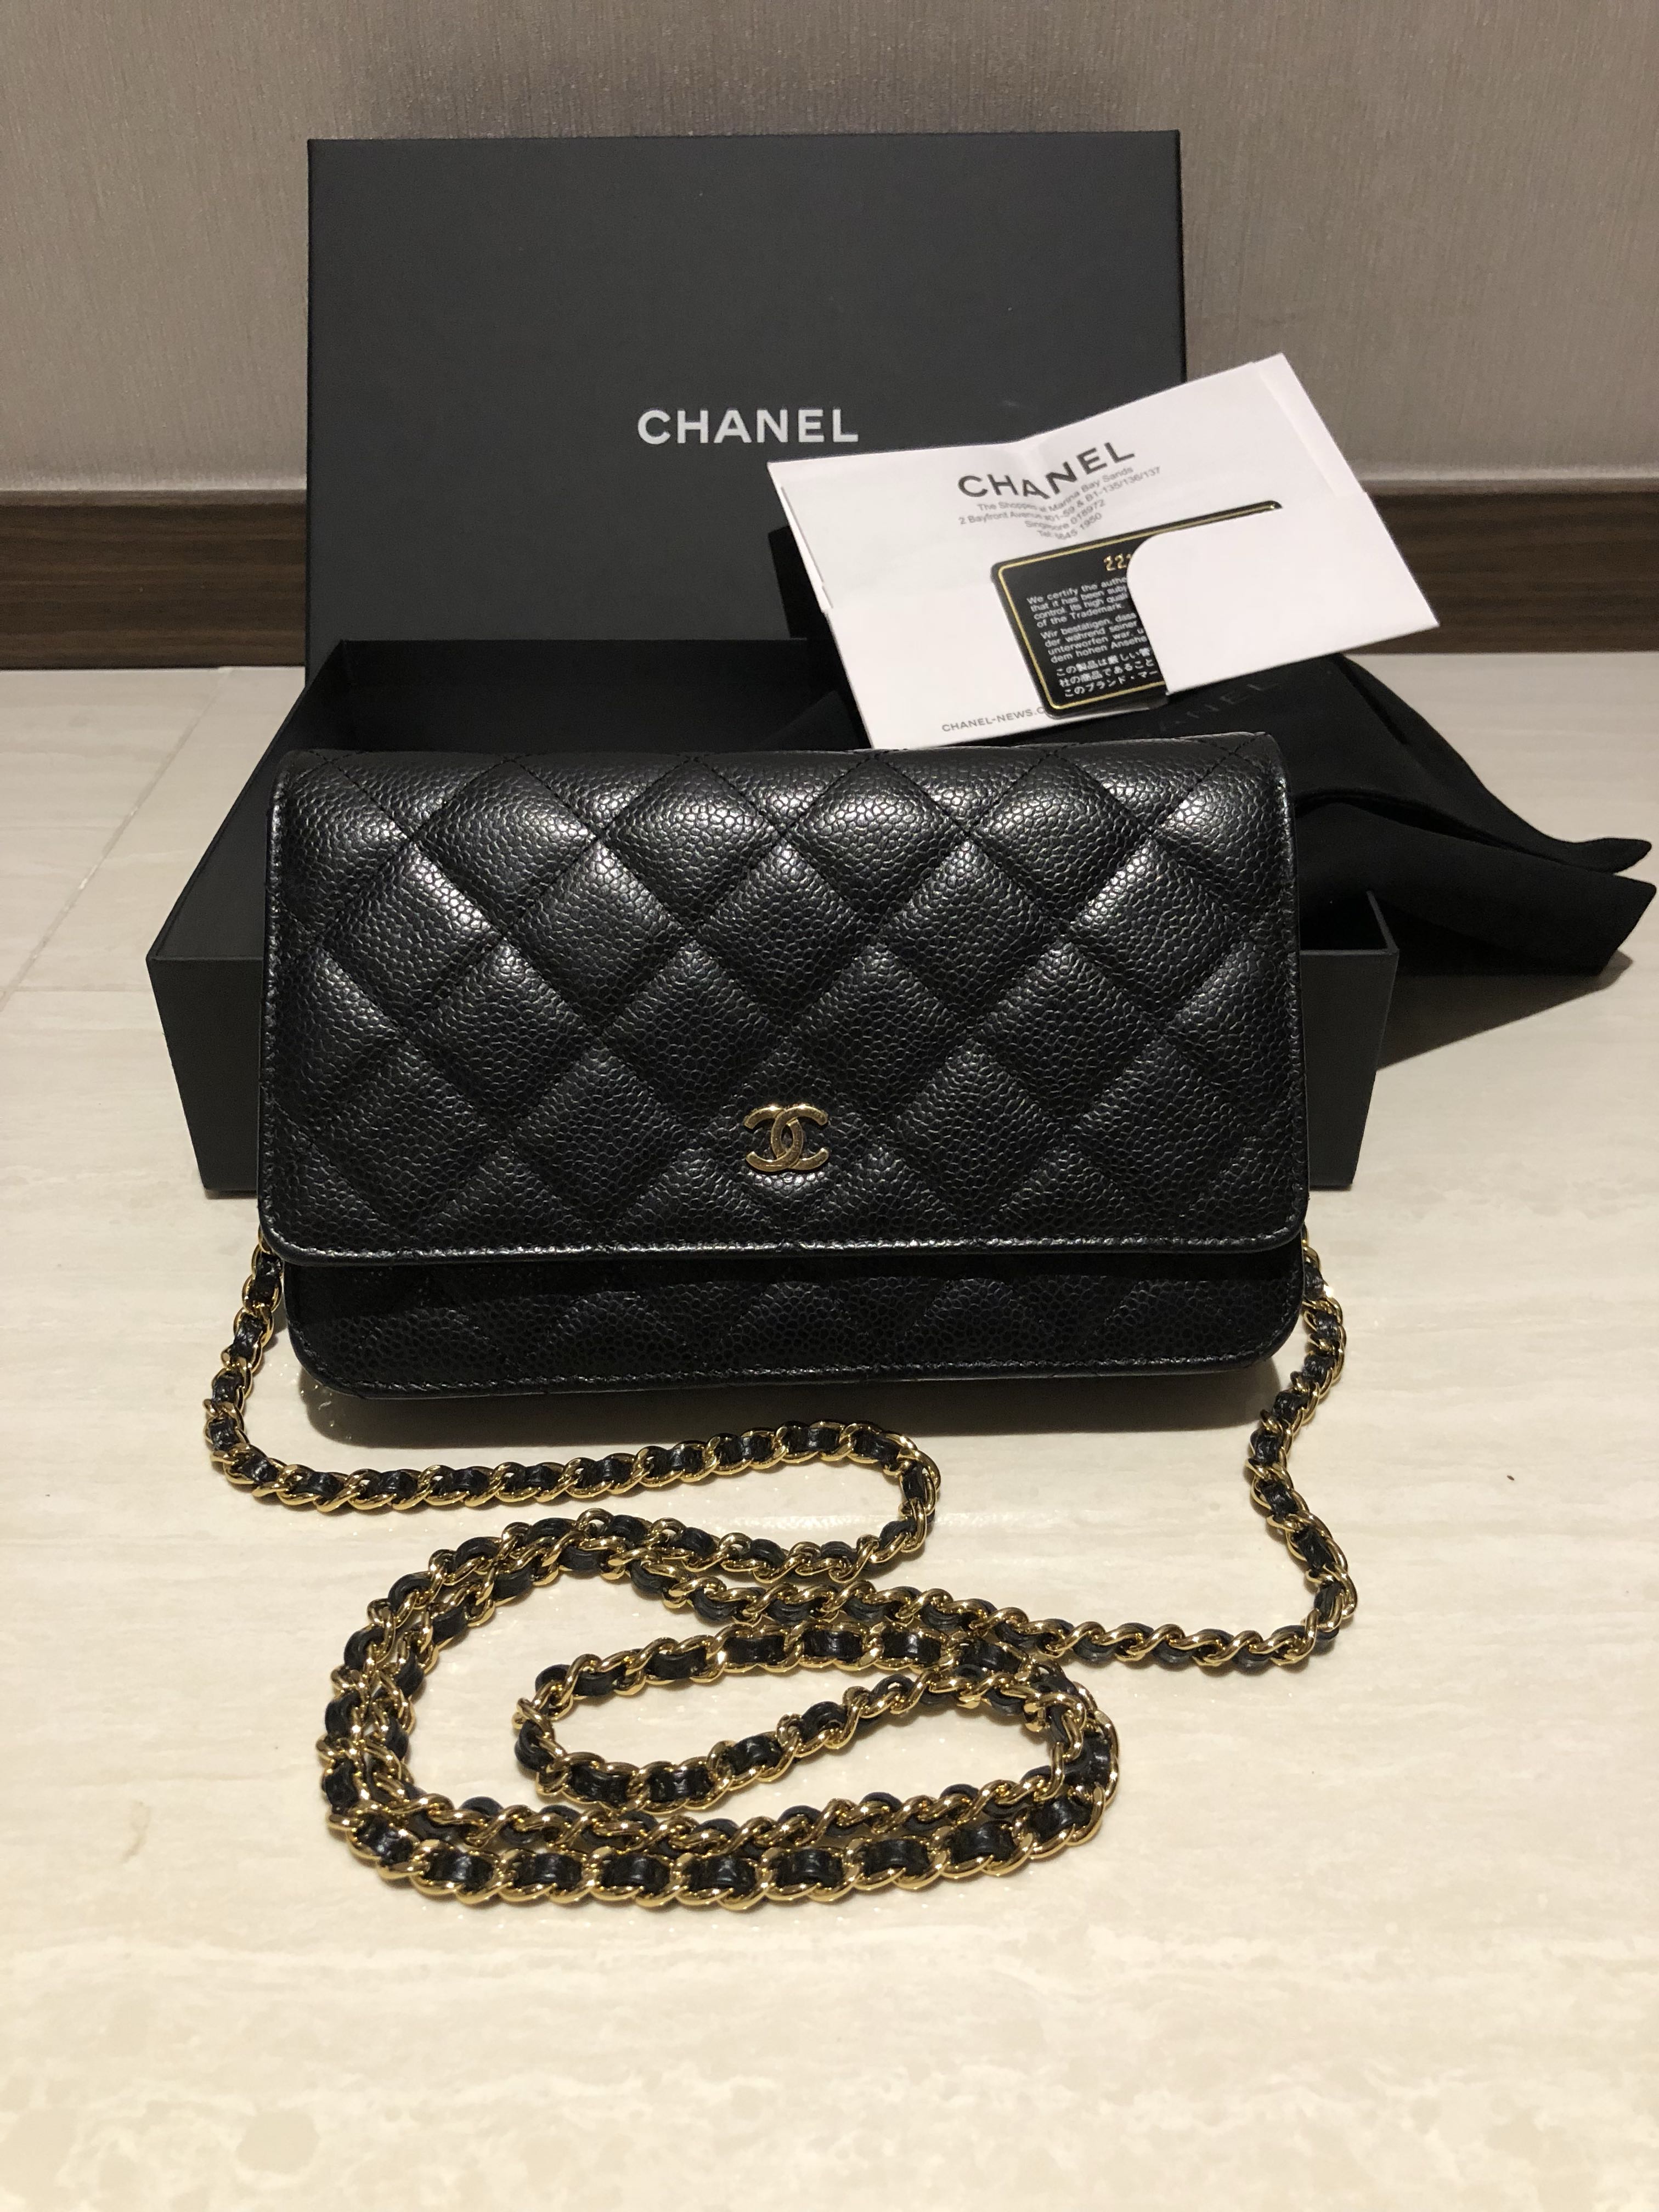 Review Chanel WOC Wallet on chain  Buy the goddamn bag